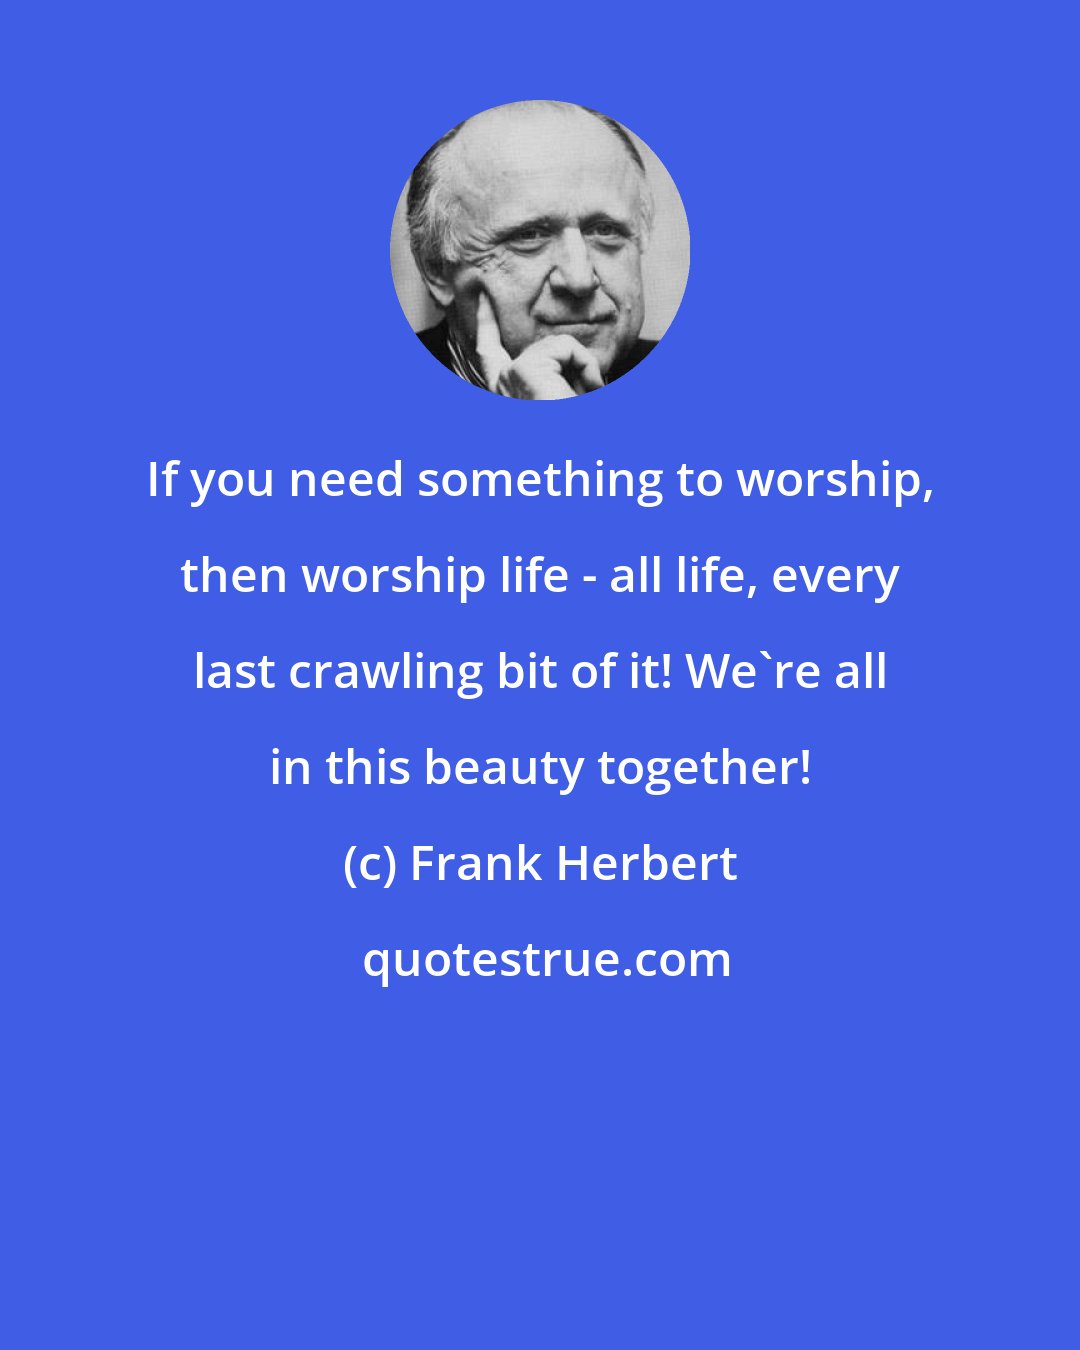 Frank Herbert: If you need something to worship, then worship life - all life, every last crawling bit of it! We're all in this beauty together!